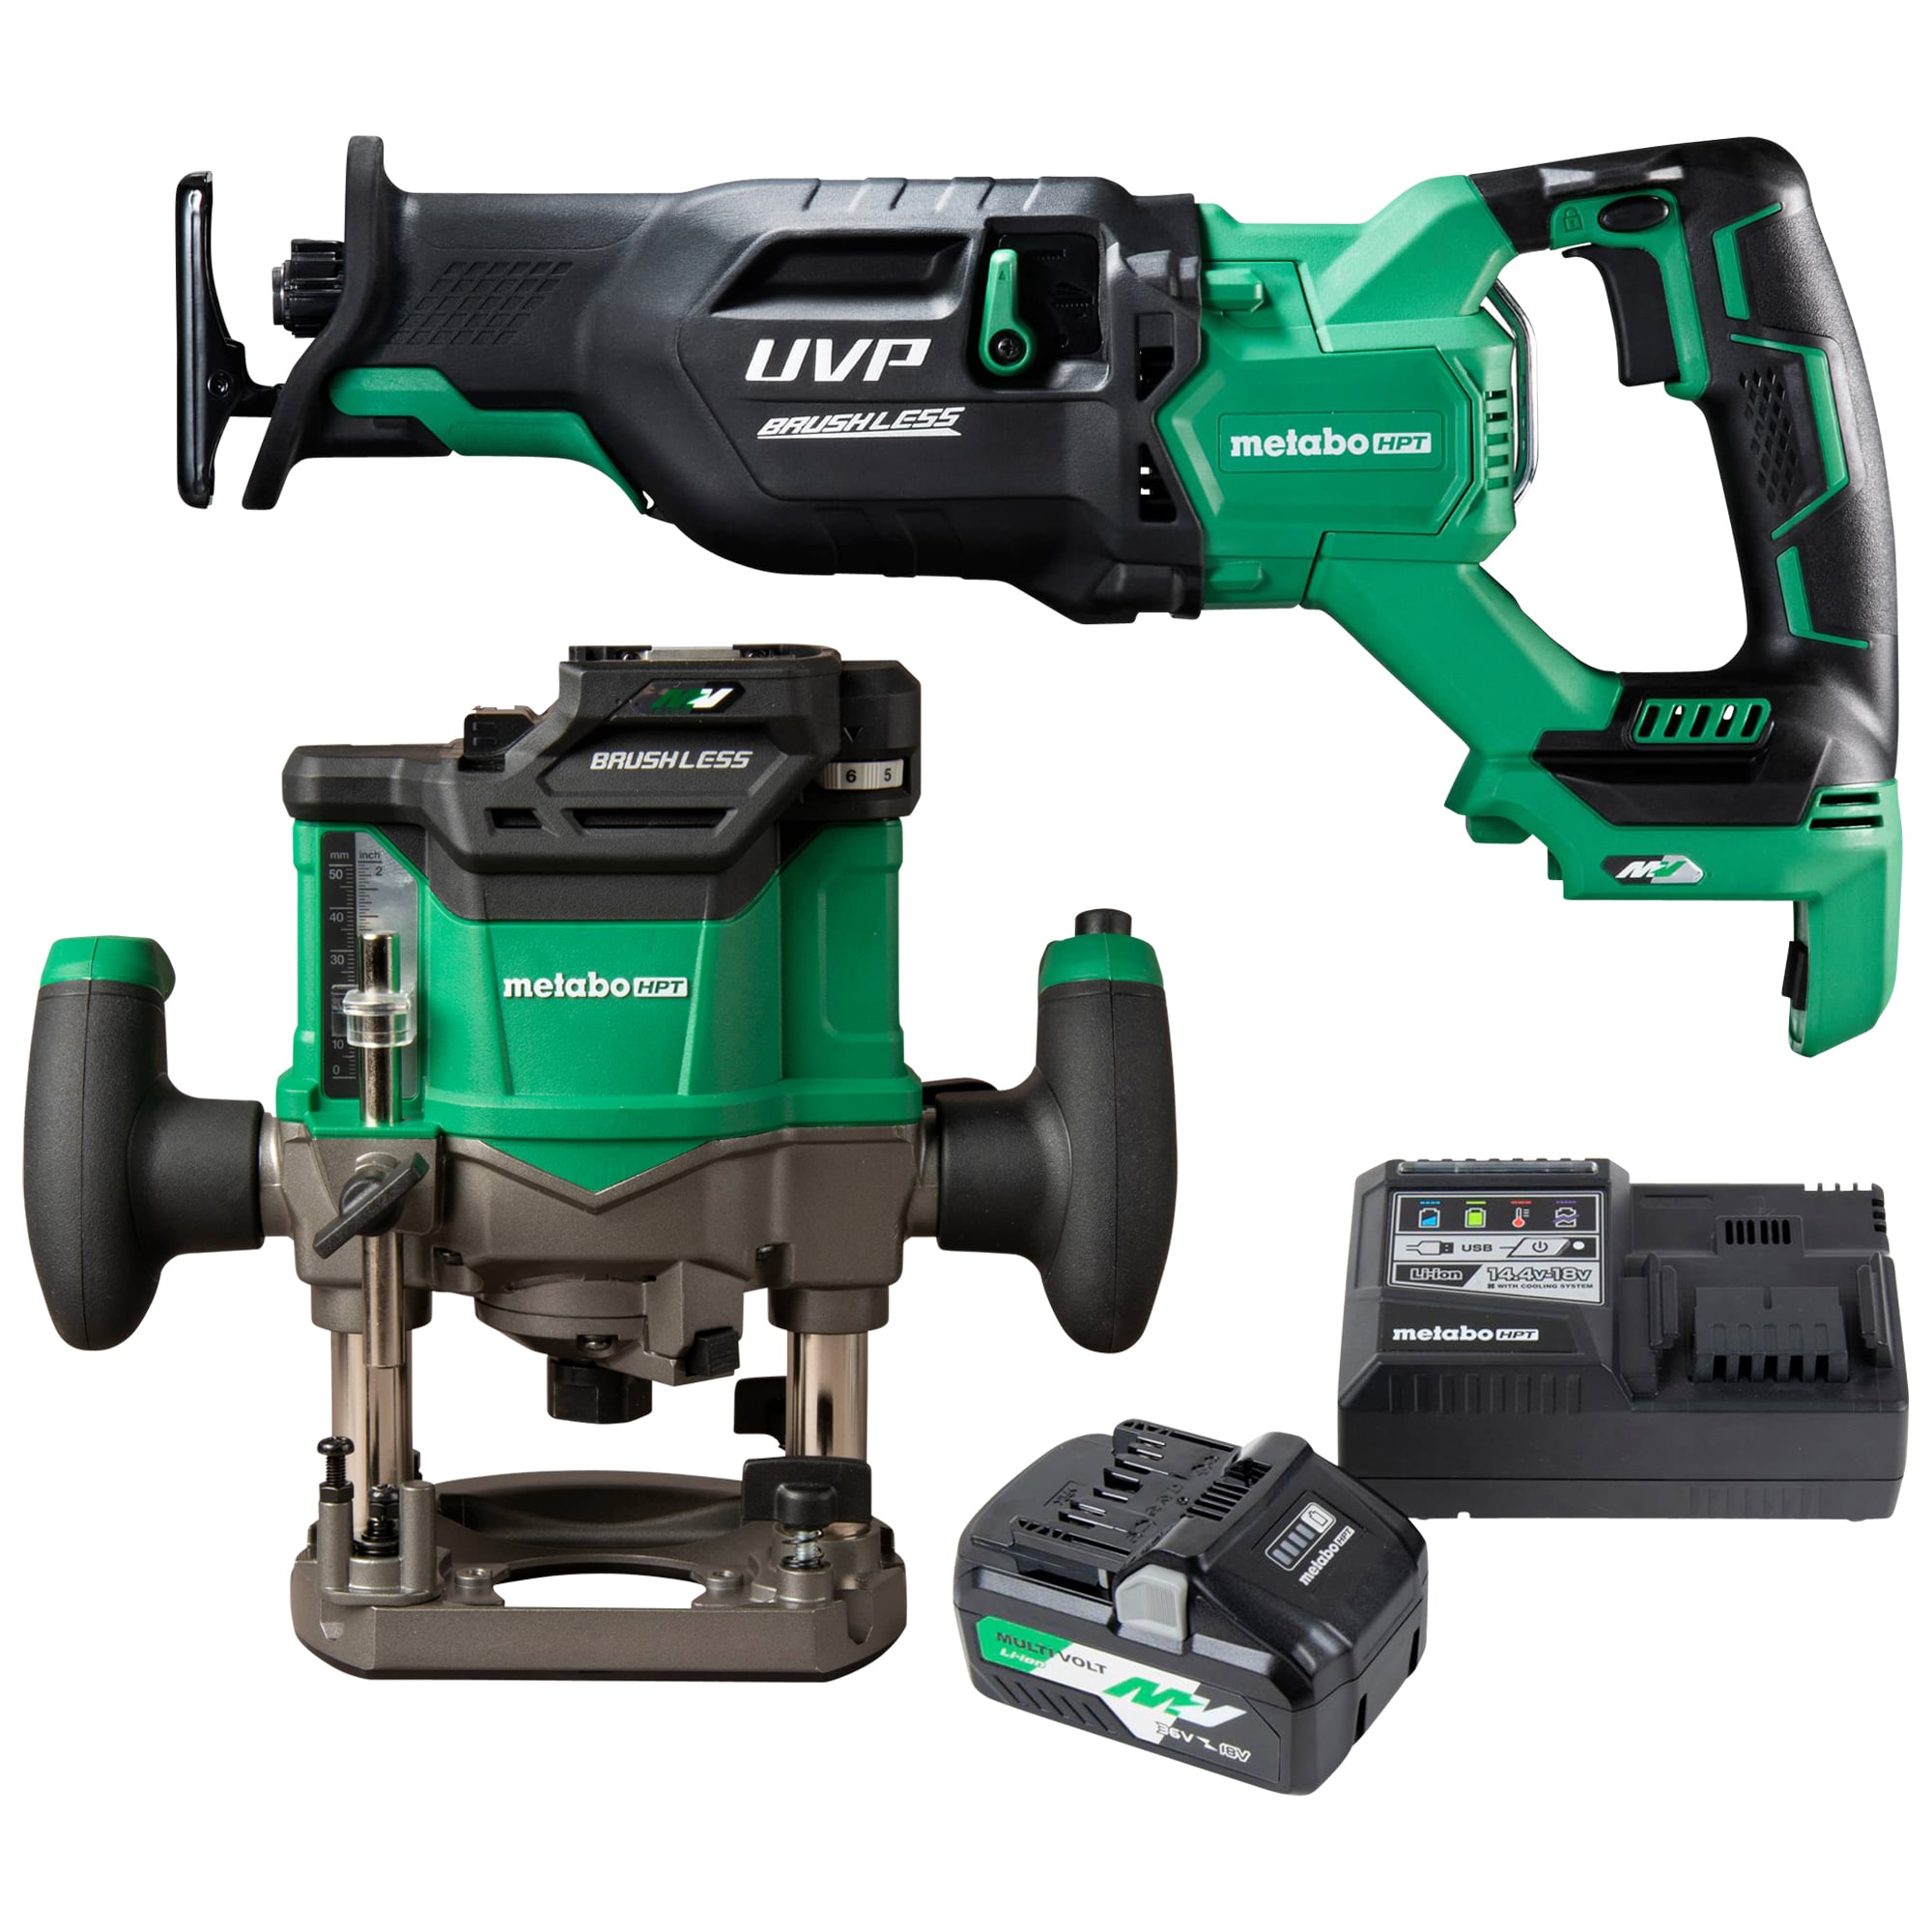 Metabo HPT Multi-Volt 1/4-in and 1/2-in 2-HP Plunge Router with 36V Reciprocating Saw + Multi-Volt Stater Kit